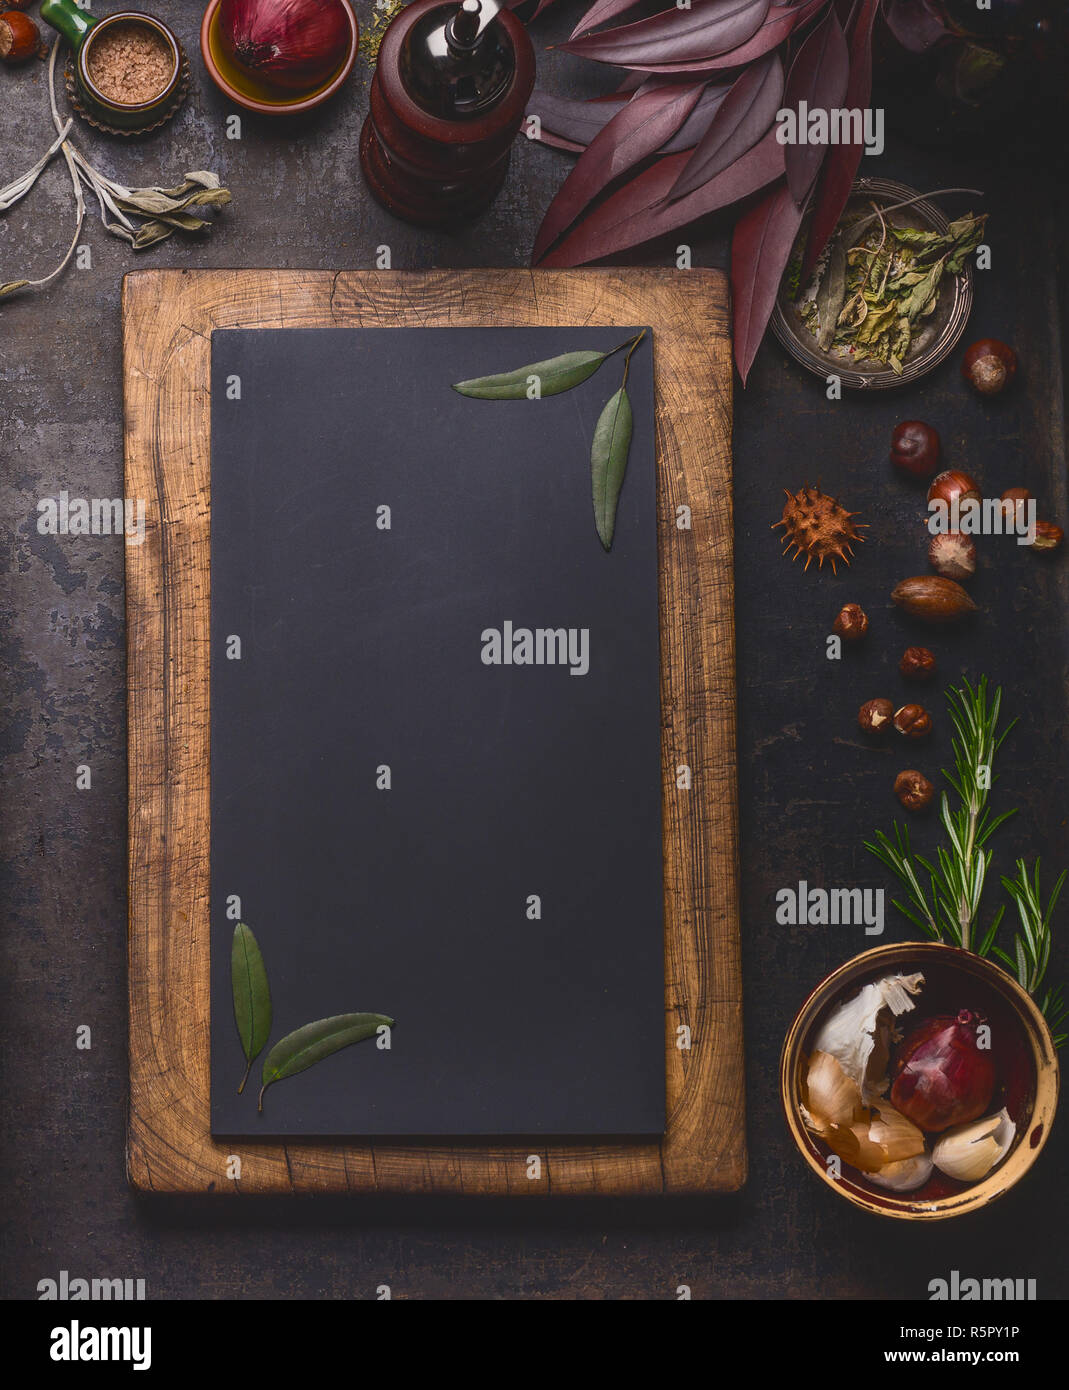 Blank chalkboard in wooden frame and cooking ingredients on dark kitchen table background, top view, frame . Stock Photo